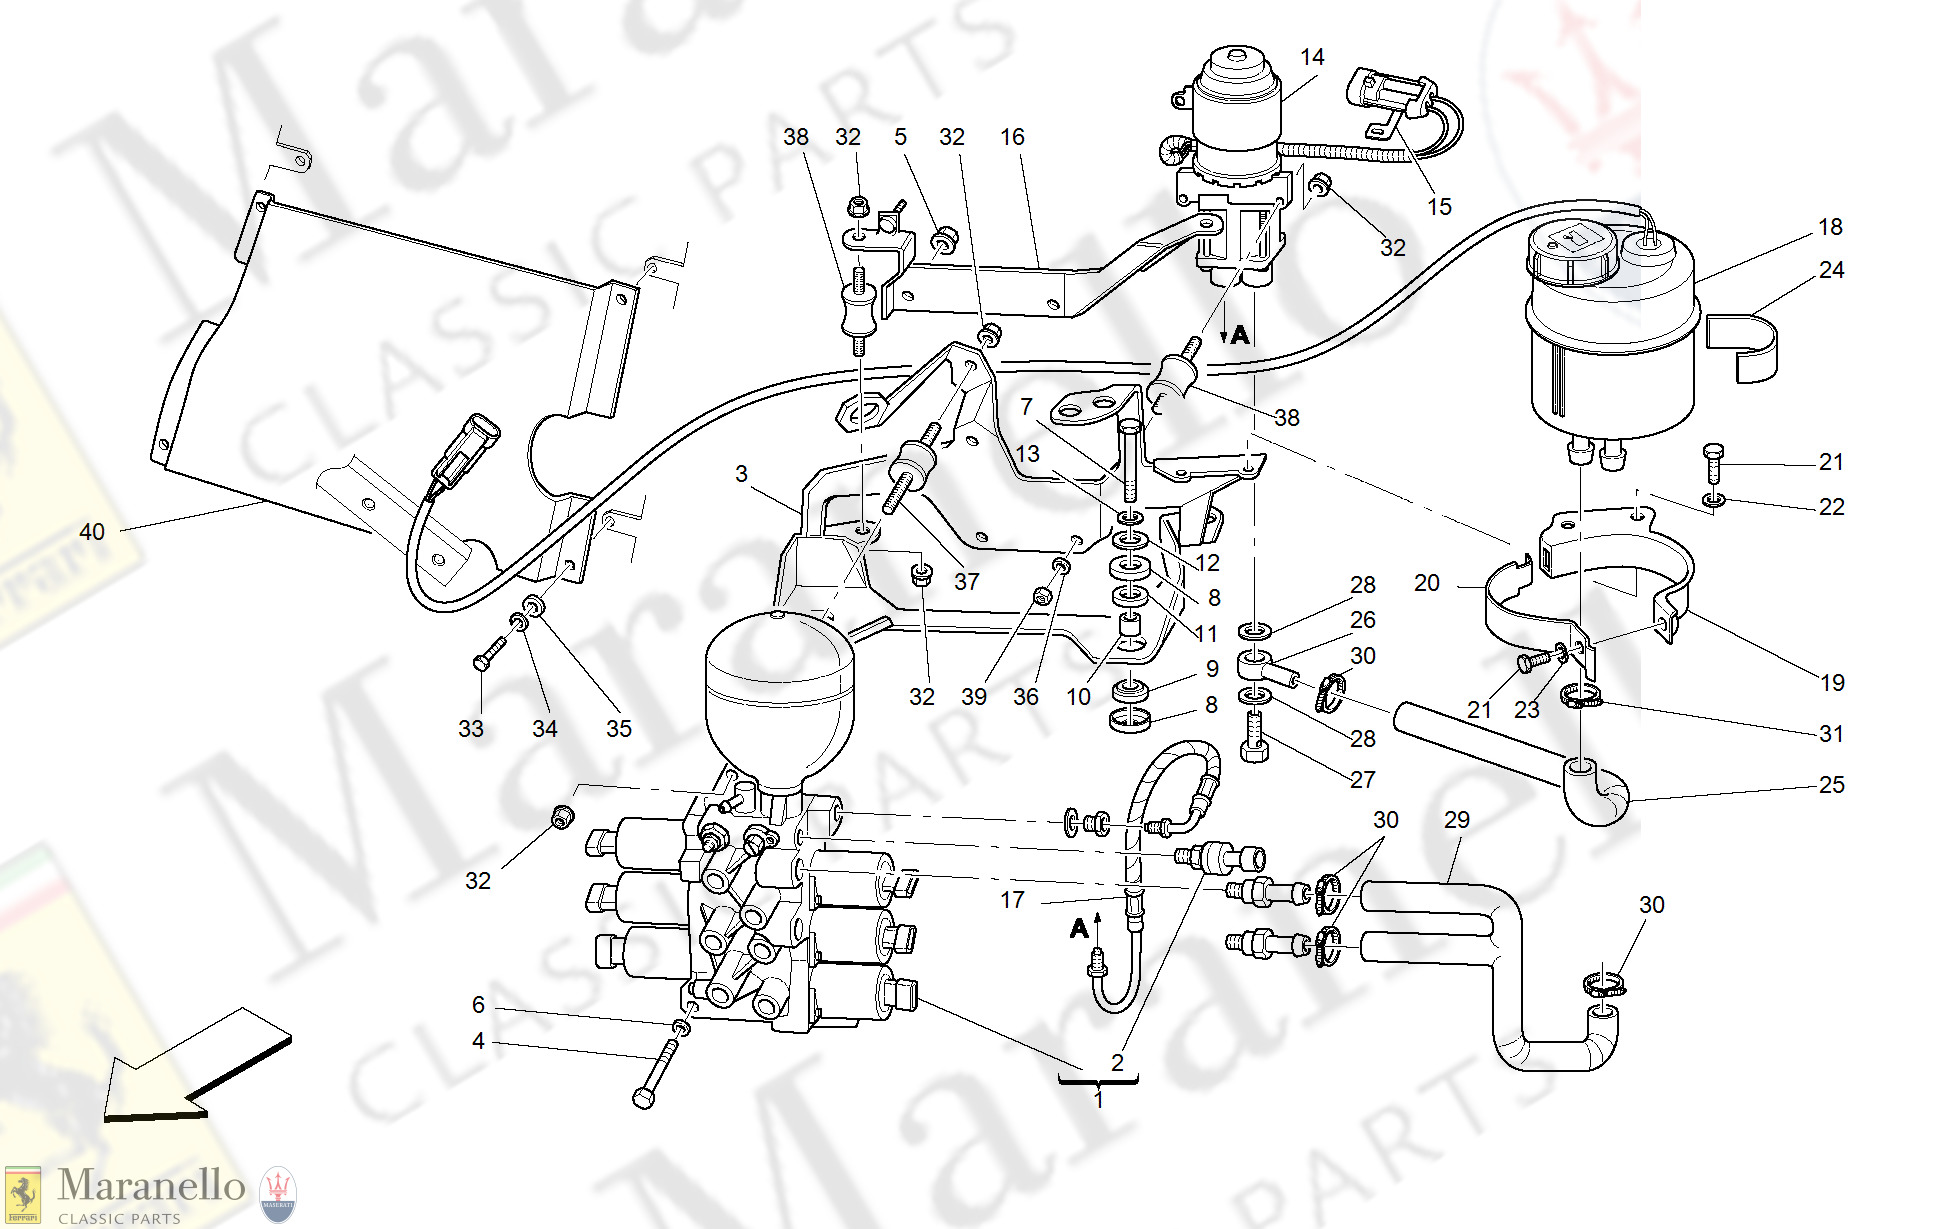 043 - Power Unit And Tank -Valid For F1-